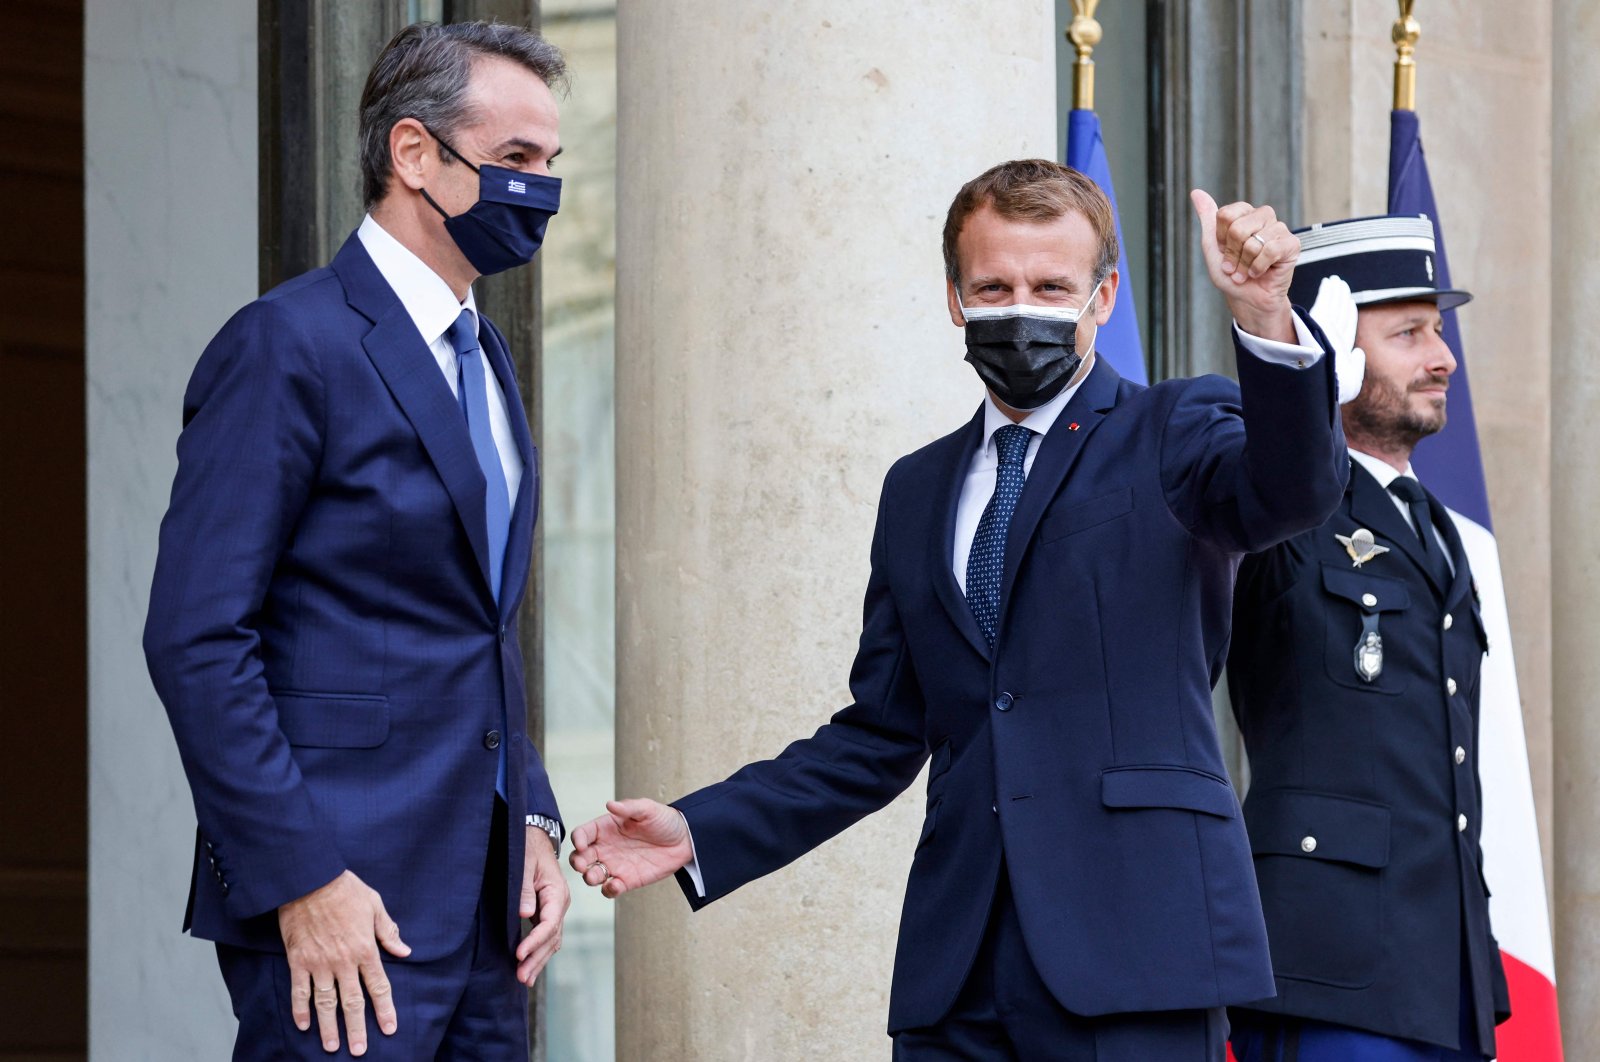 French President Emmanuel Macron (R) and Greek Prime Minister Kyriakos Mitsotakis gesture prior to the signing ceremony of a new defense deal at The Elysee Palace in Paris, France, Sept. 28, 2021. (AFP Photo)